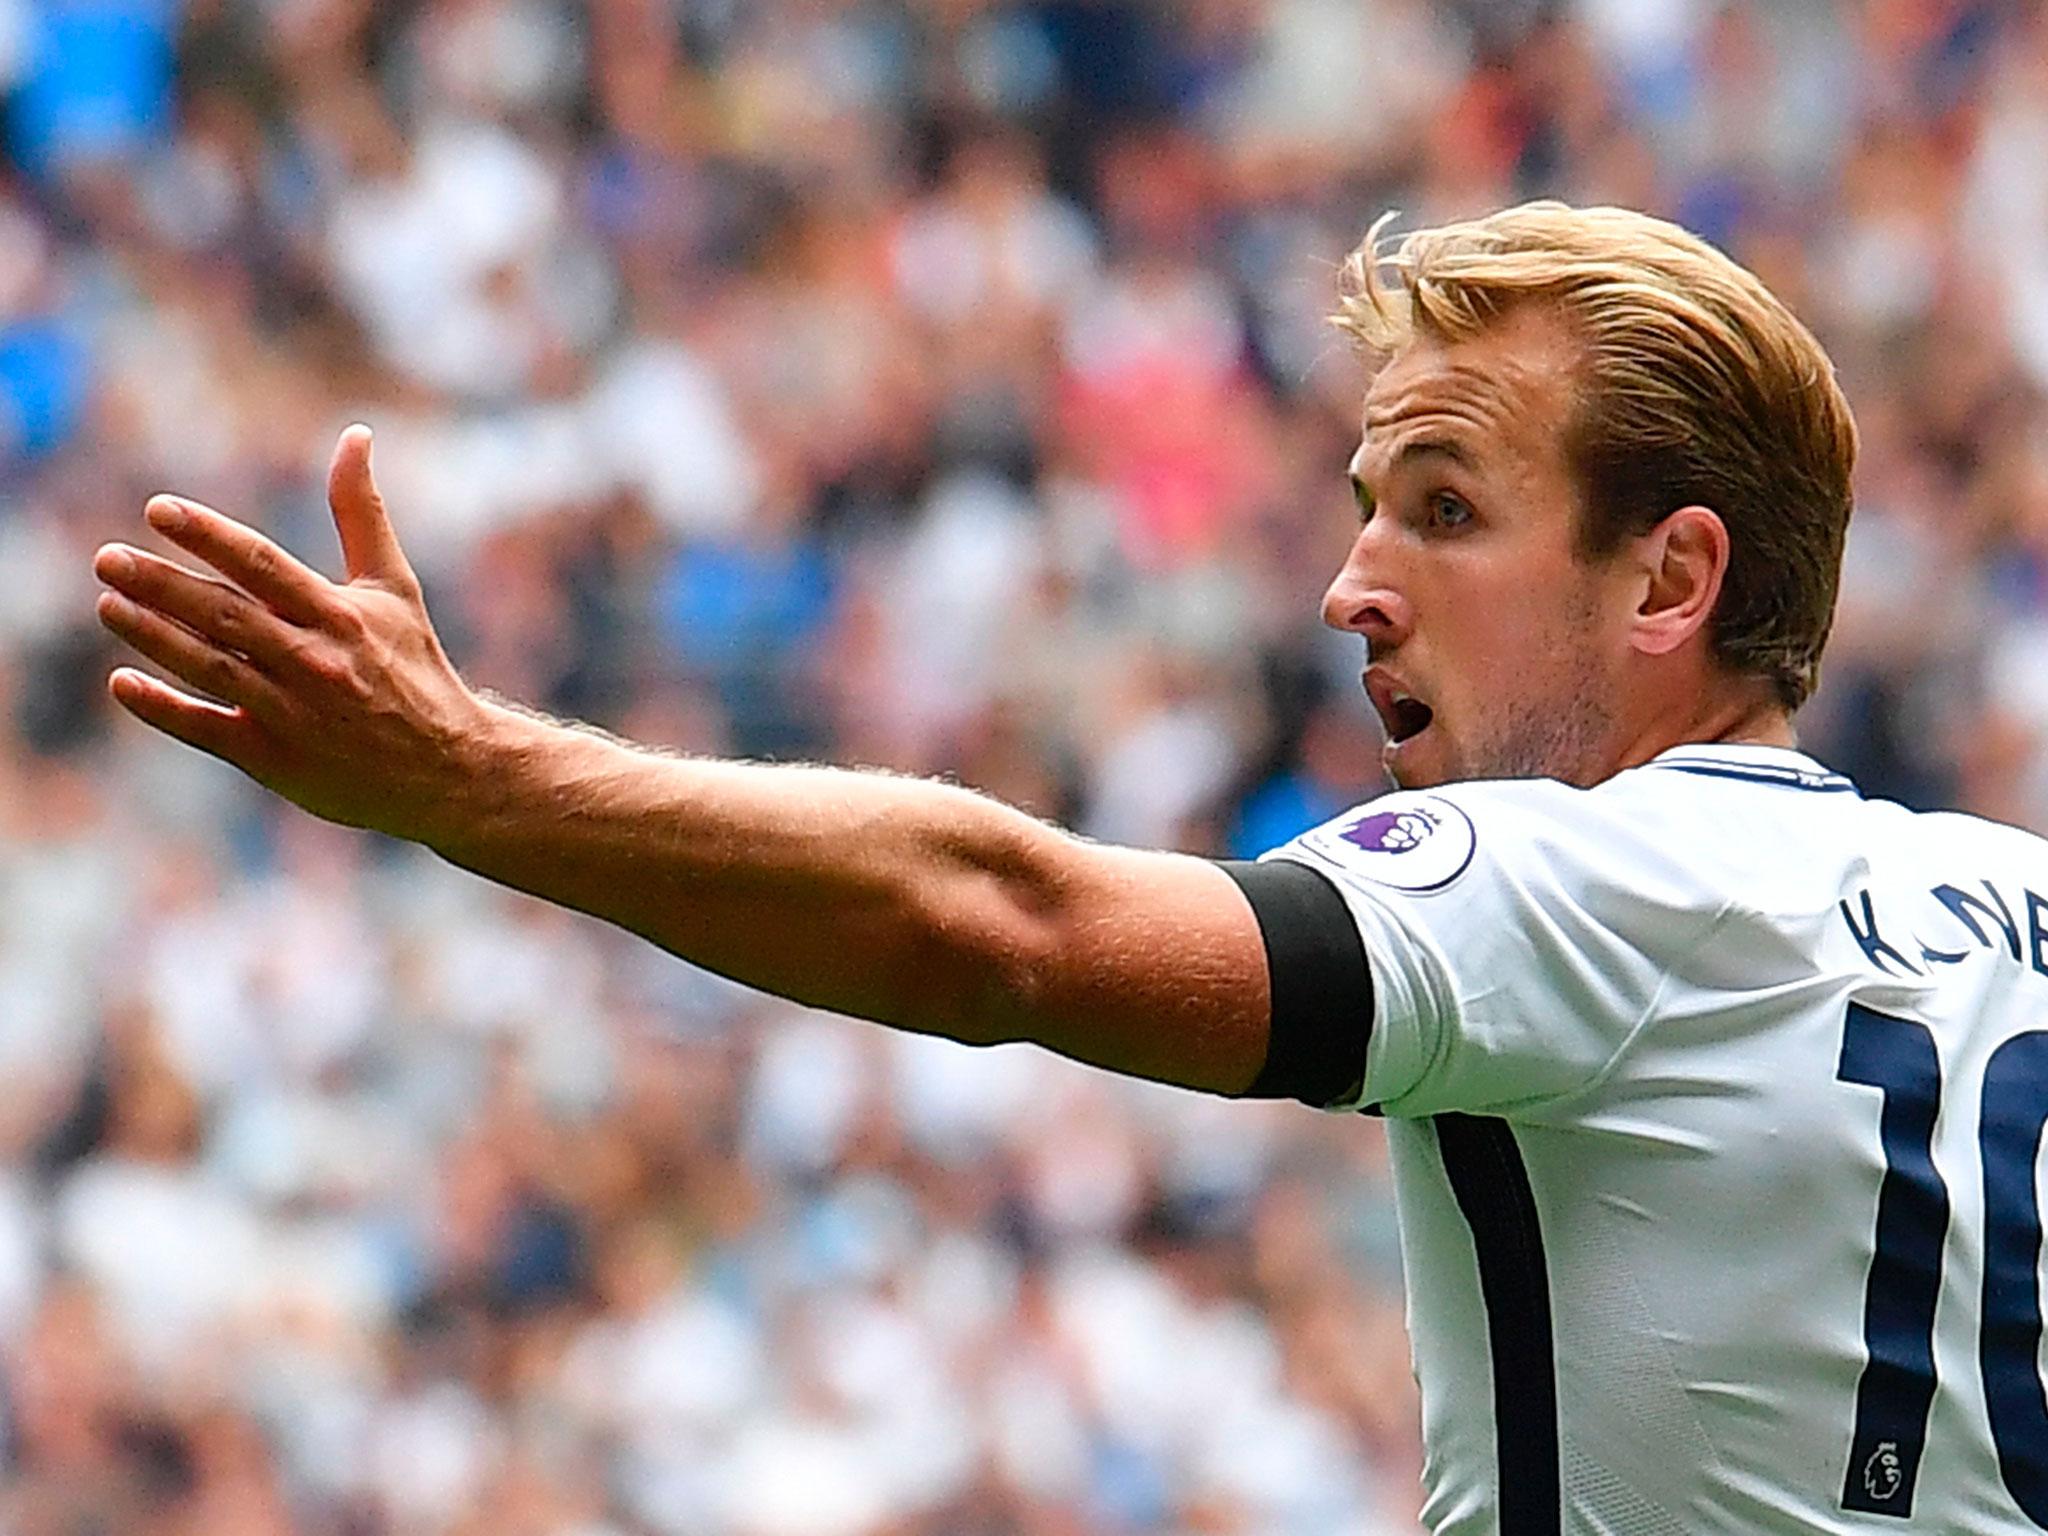 Harry Kane and his Tottenham team-mates were beaten on their league debut at Wembley by rivals Chelsea